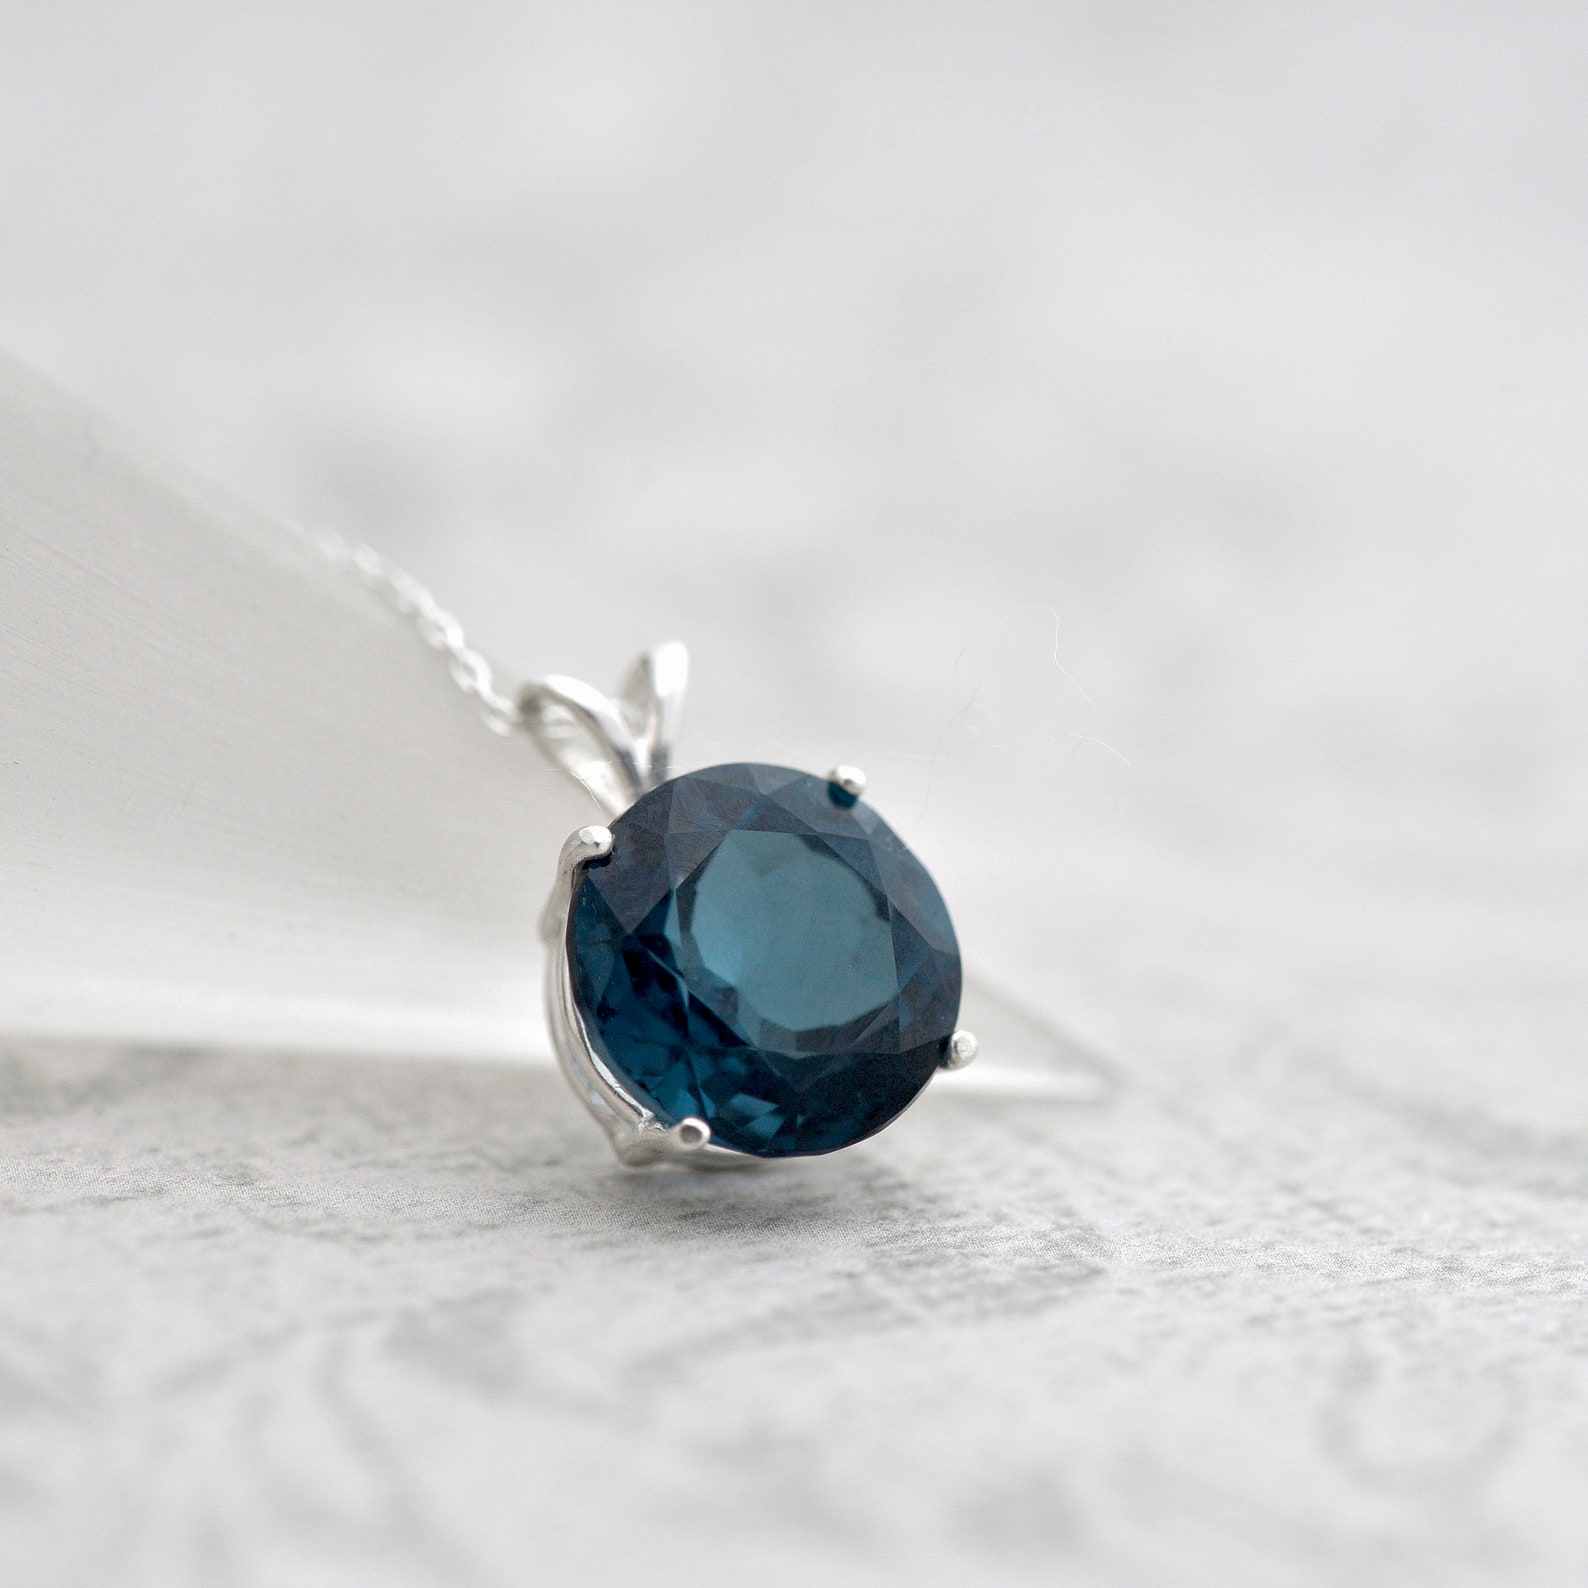 Blue Topaz solitaire pendant by Ian Caird iana Jewellery